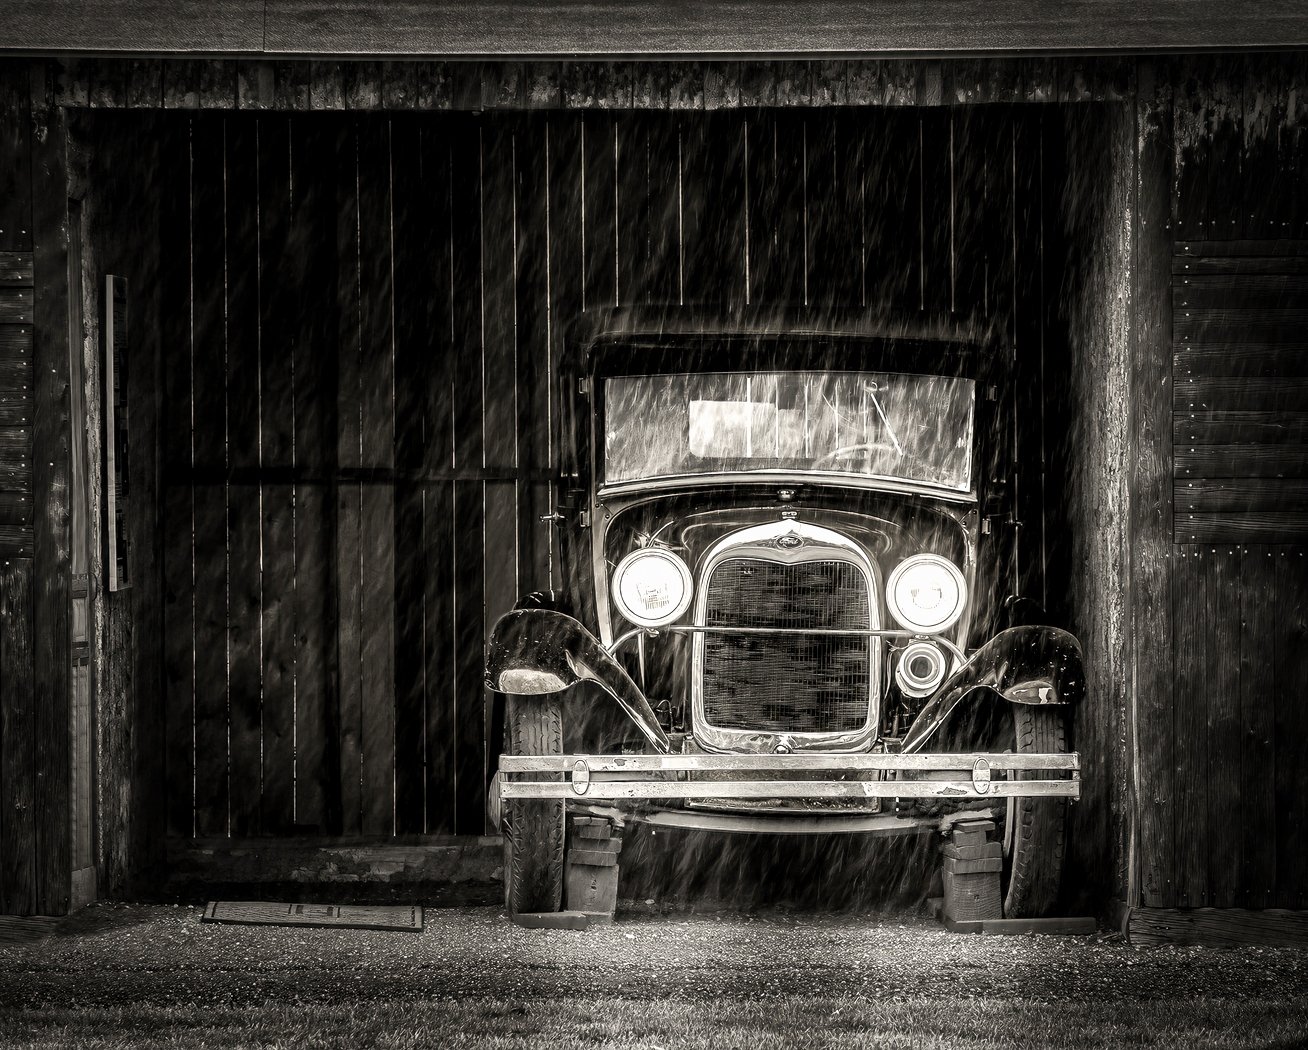 In The Rain With The Lights On,	Brian Fesko, Cowtown Camera Club, 1 HM